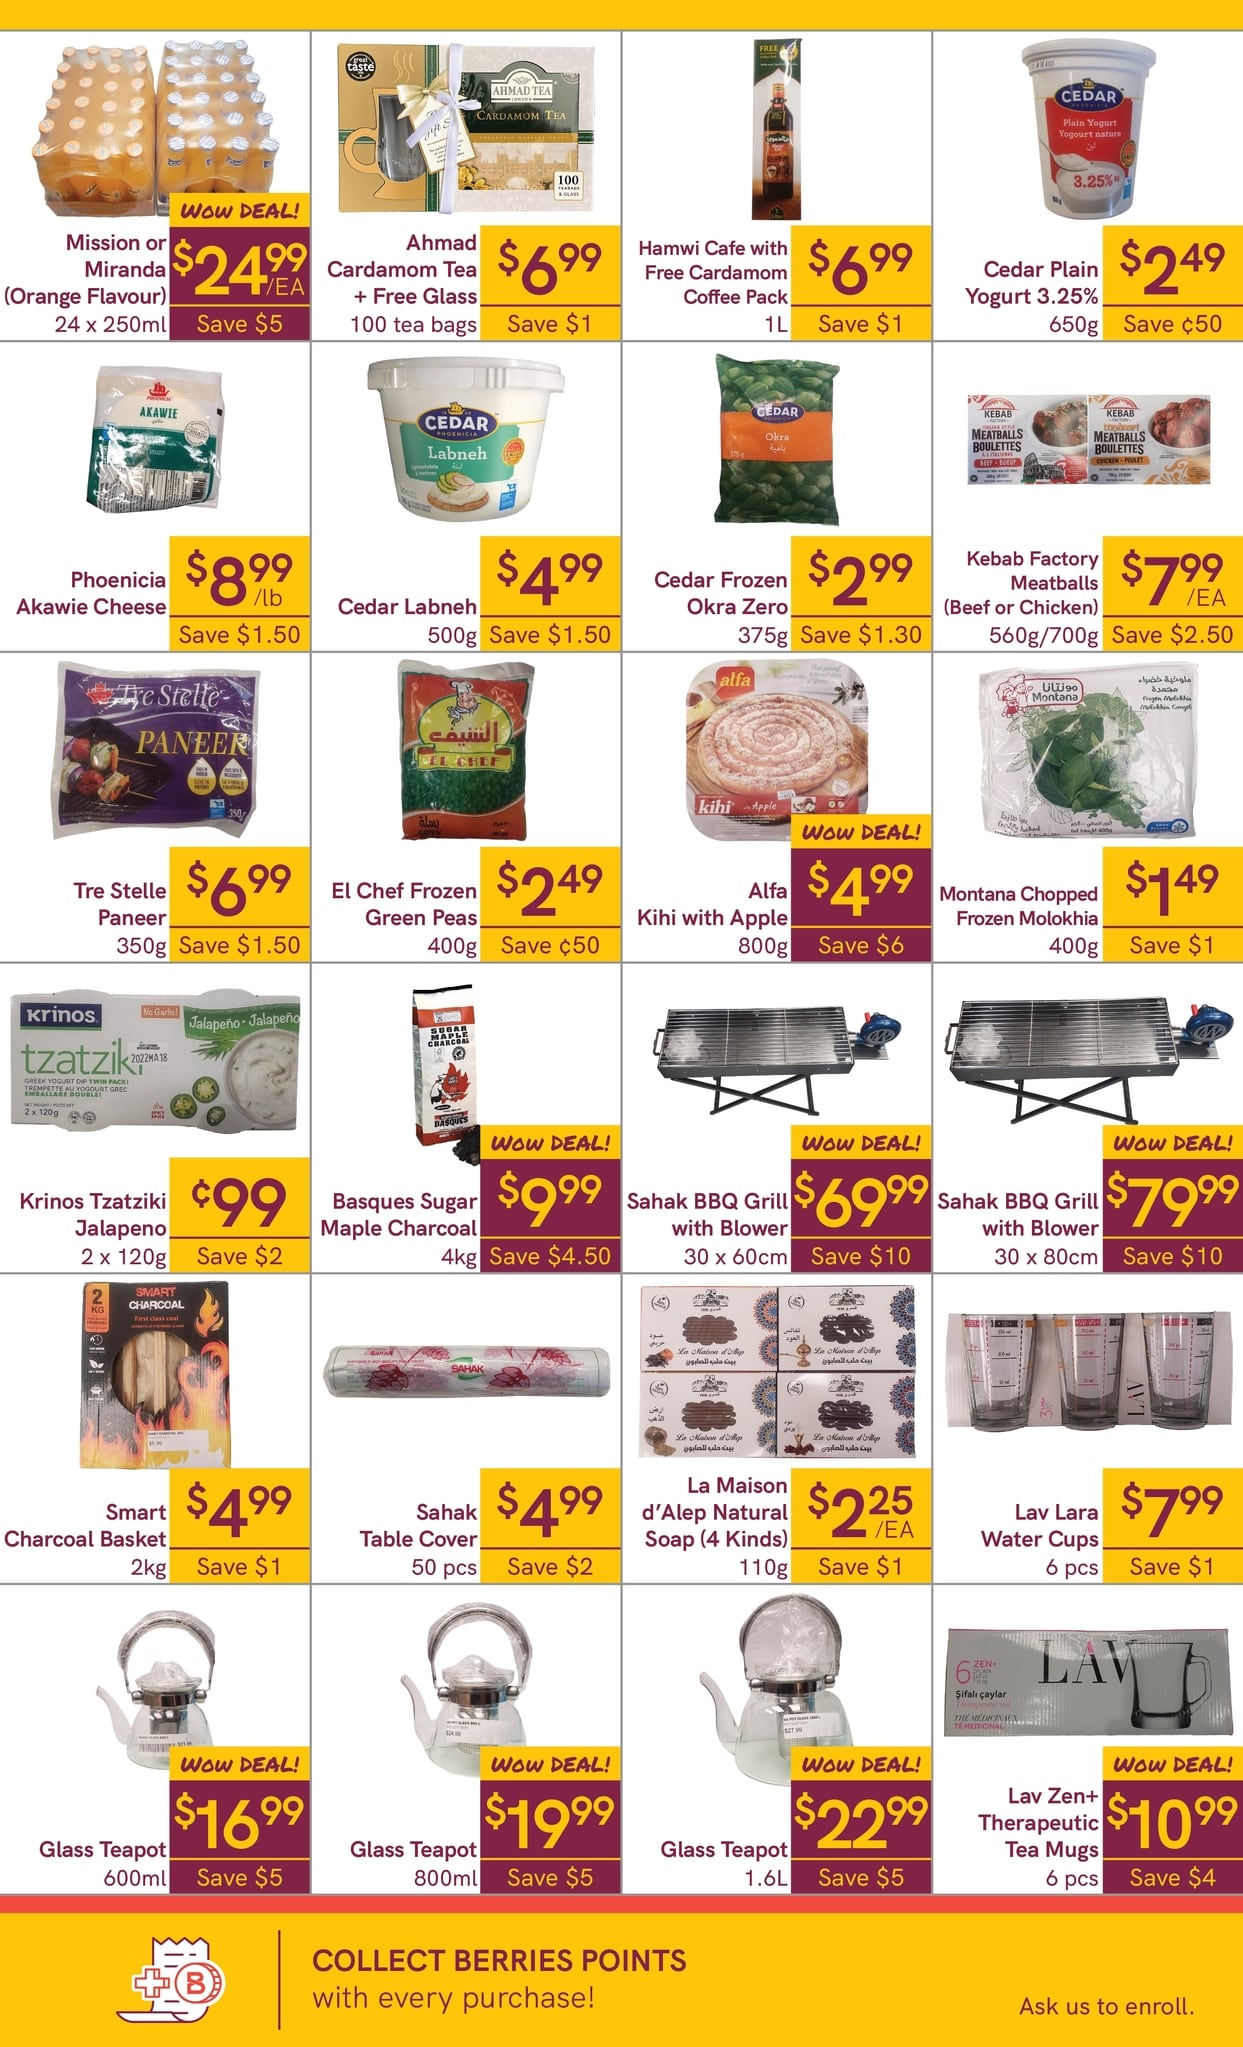 Berries Market - Weekly Flyer Specials - Page 3